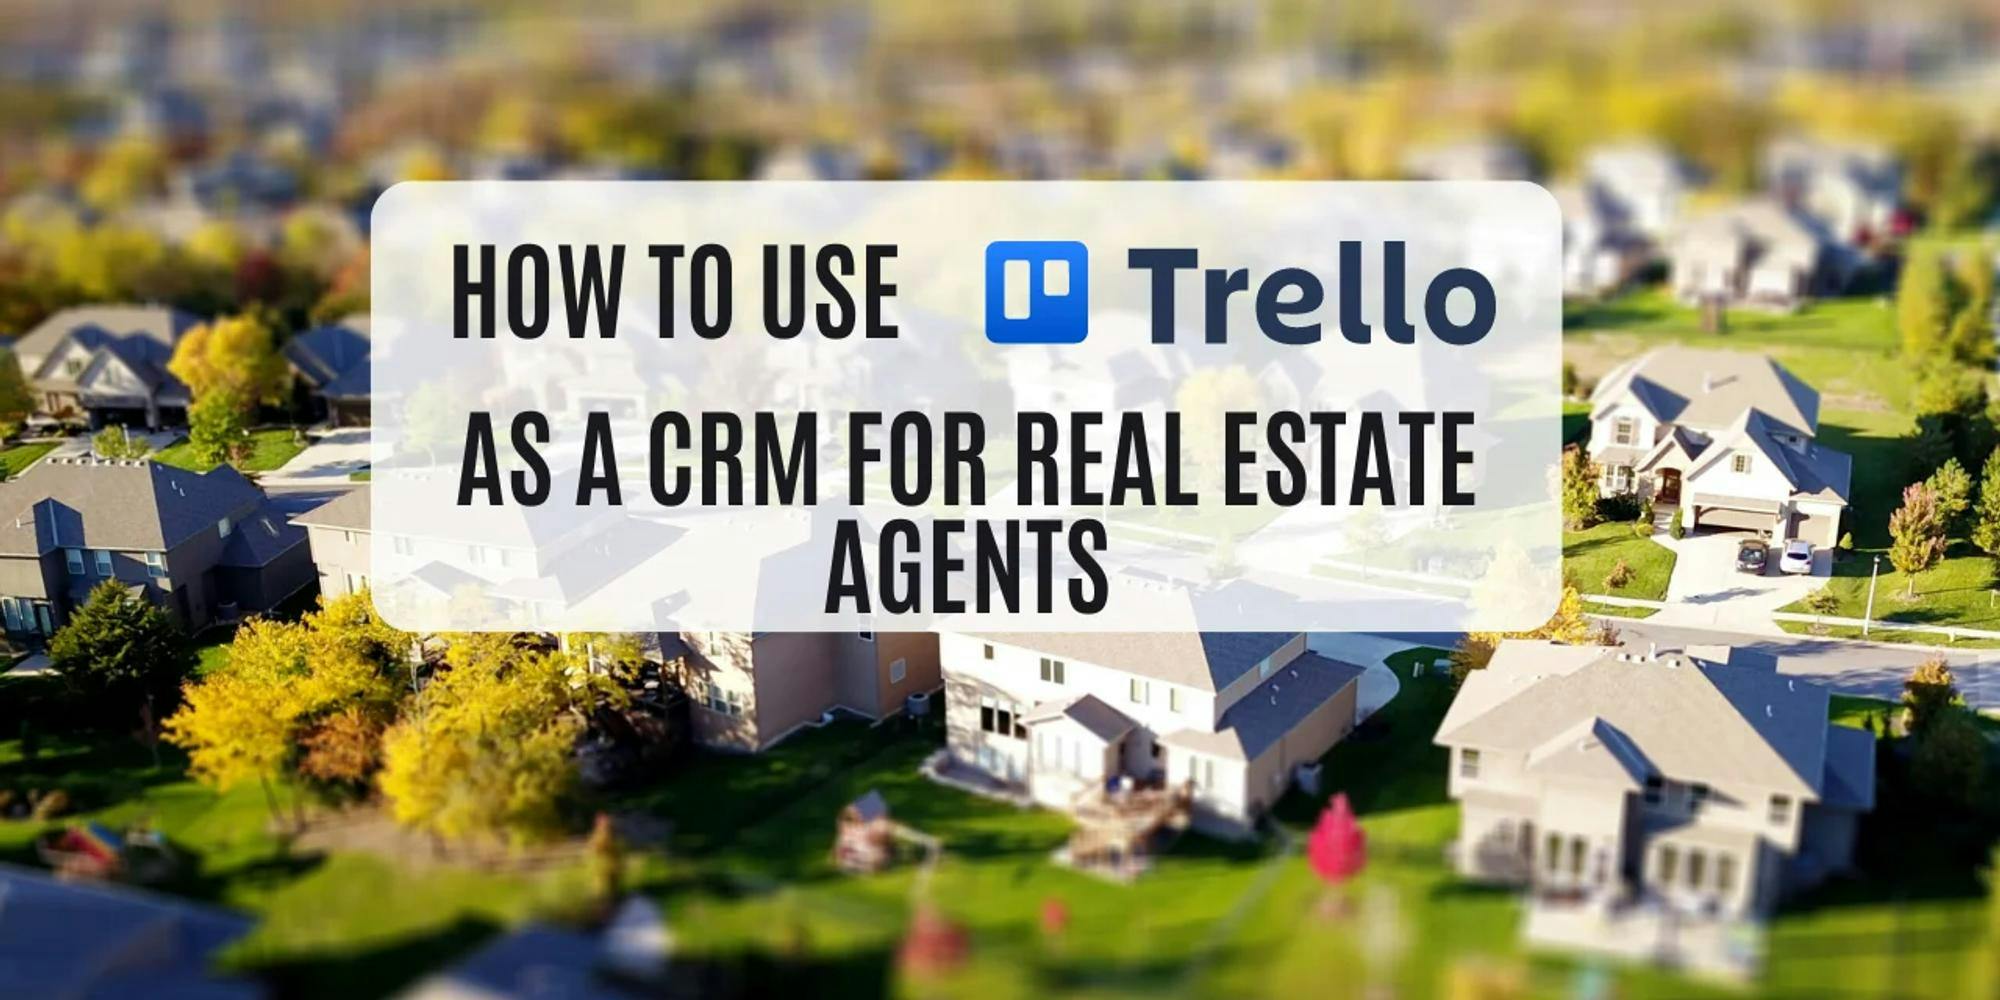 How to Use Trello as a CRM for Real Estate Agents